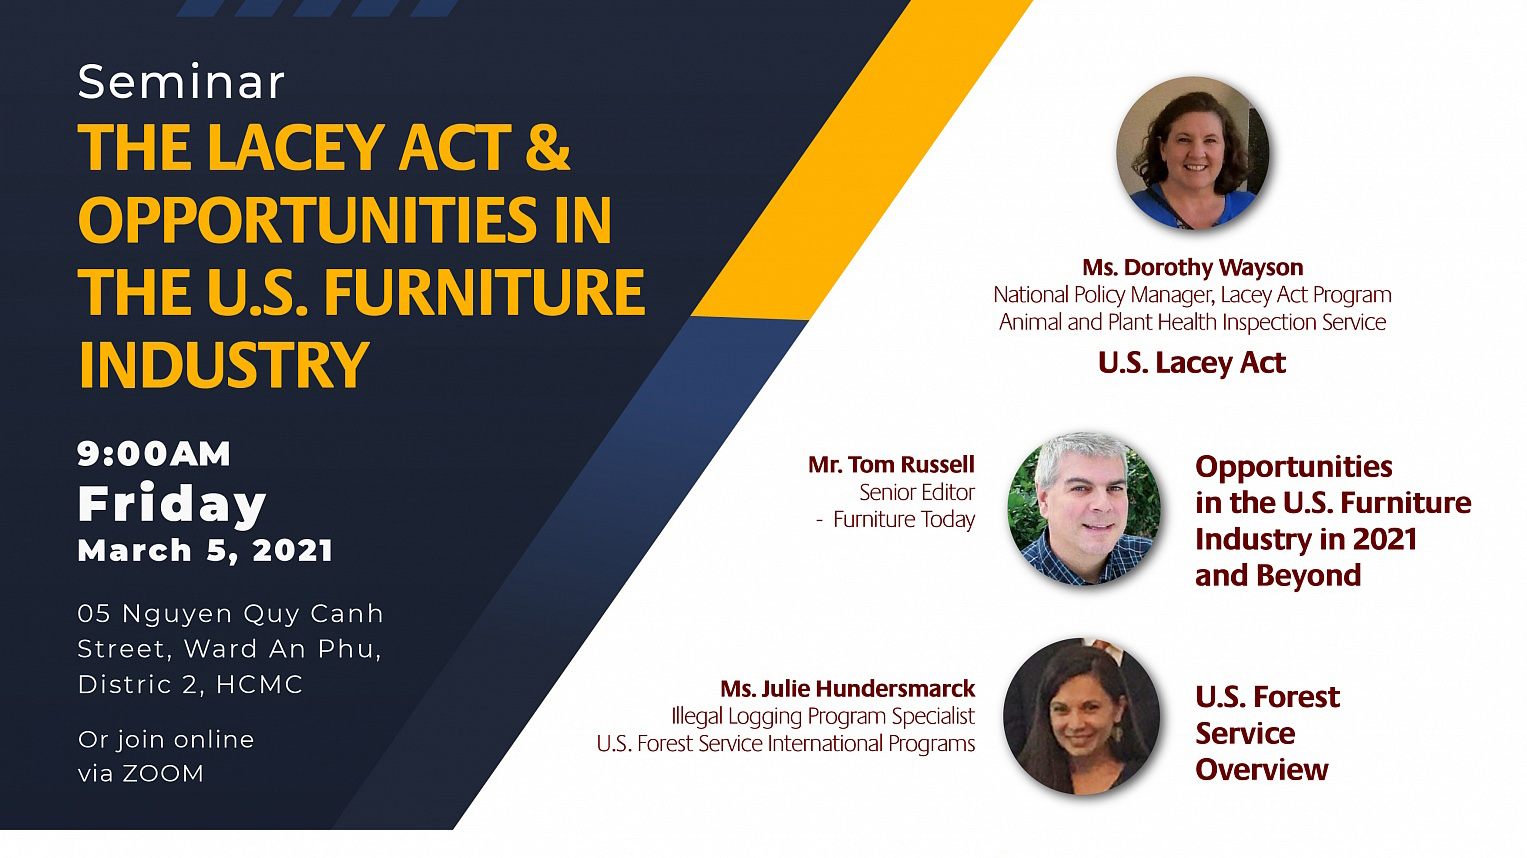 The Lacey Act & opportunities in the US furniture industry